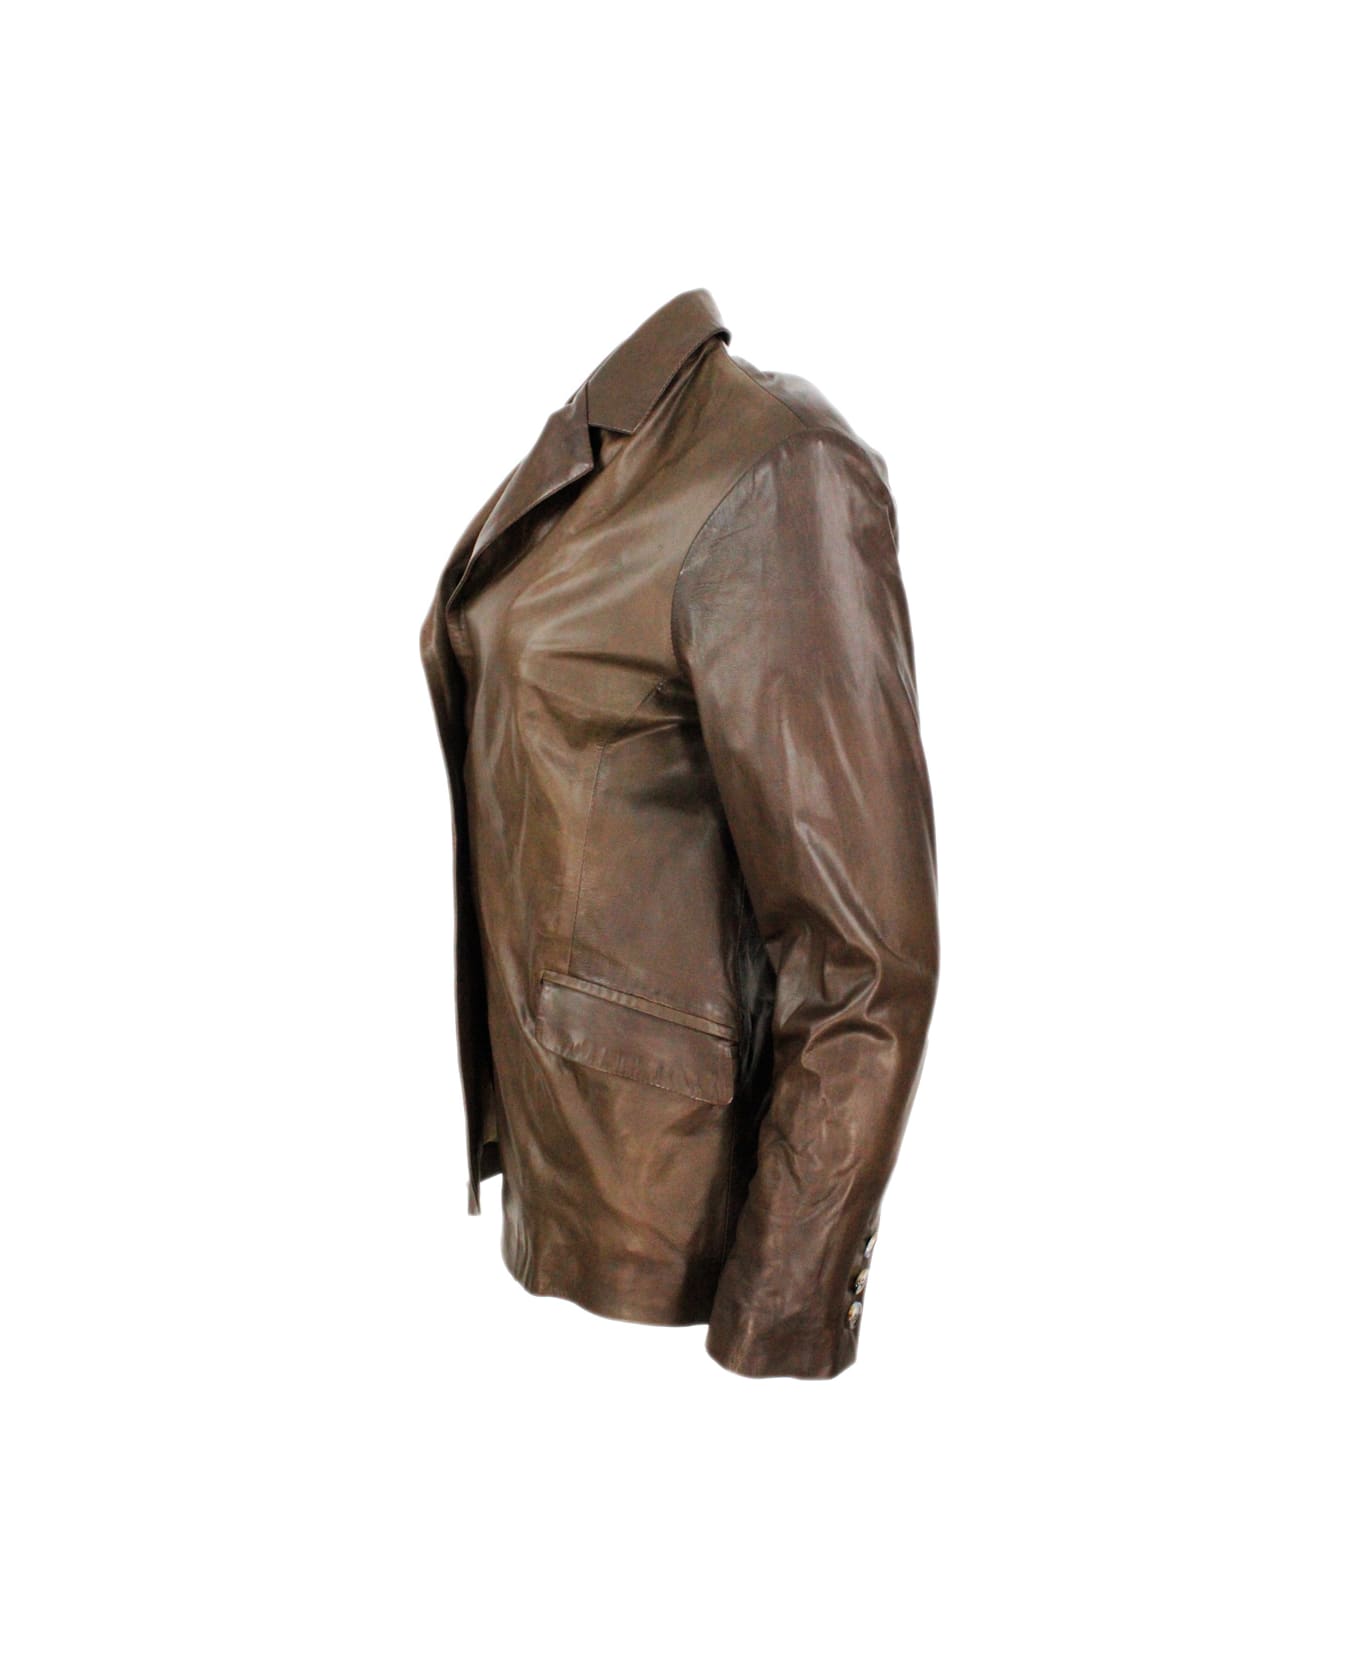 Barba Napoli Soft Leather Blazer Jacket With 2 Button Closure And Flap Pockets - Brown